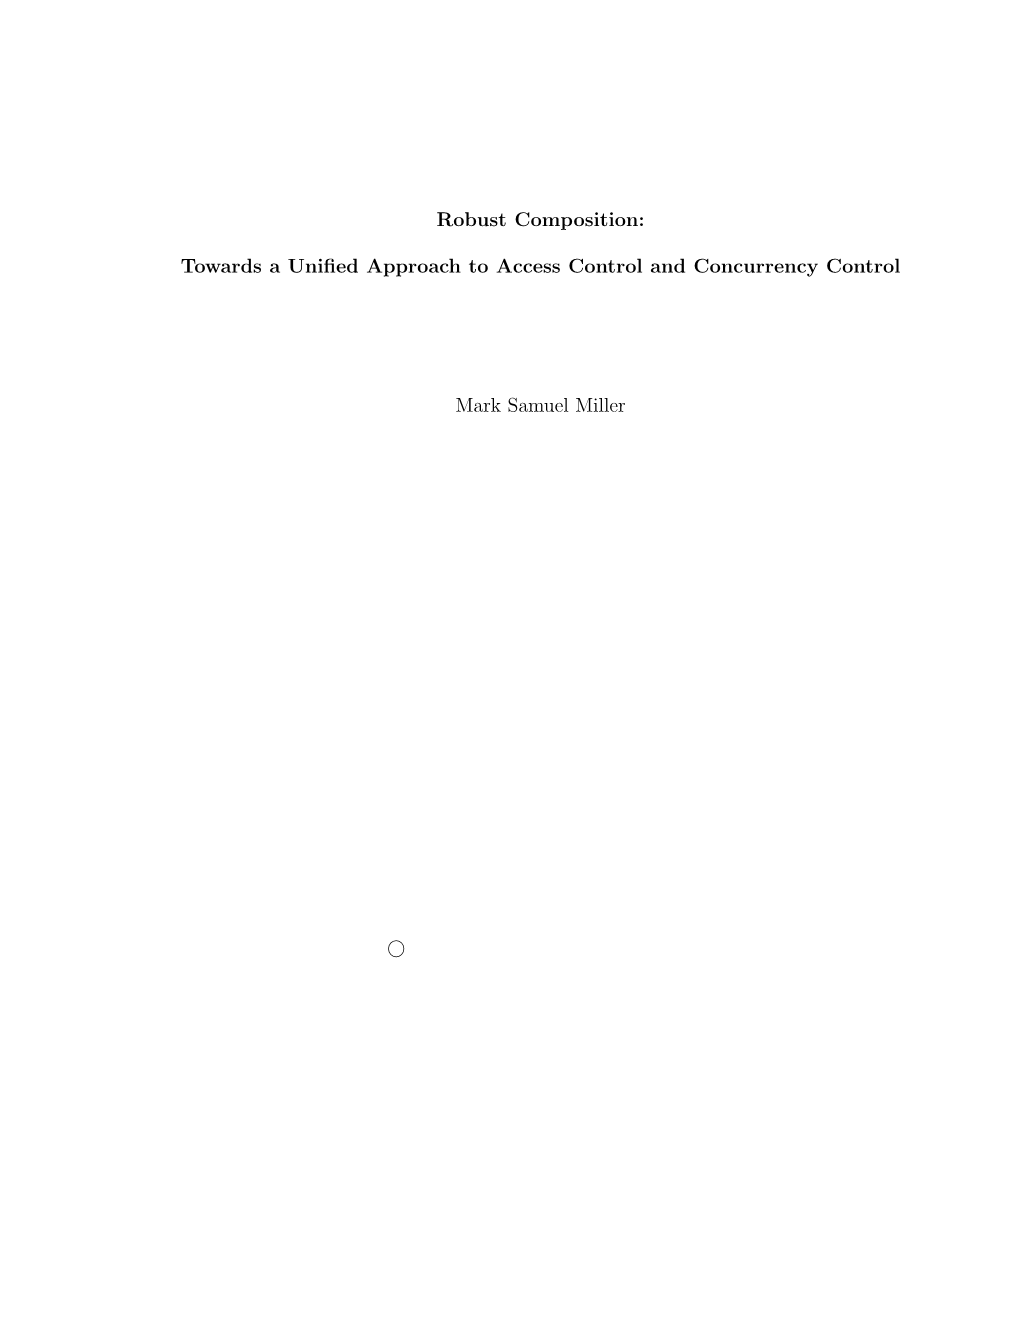 Robust Composition: Towards a Unified Approach To